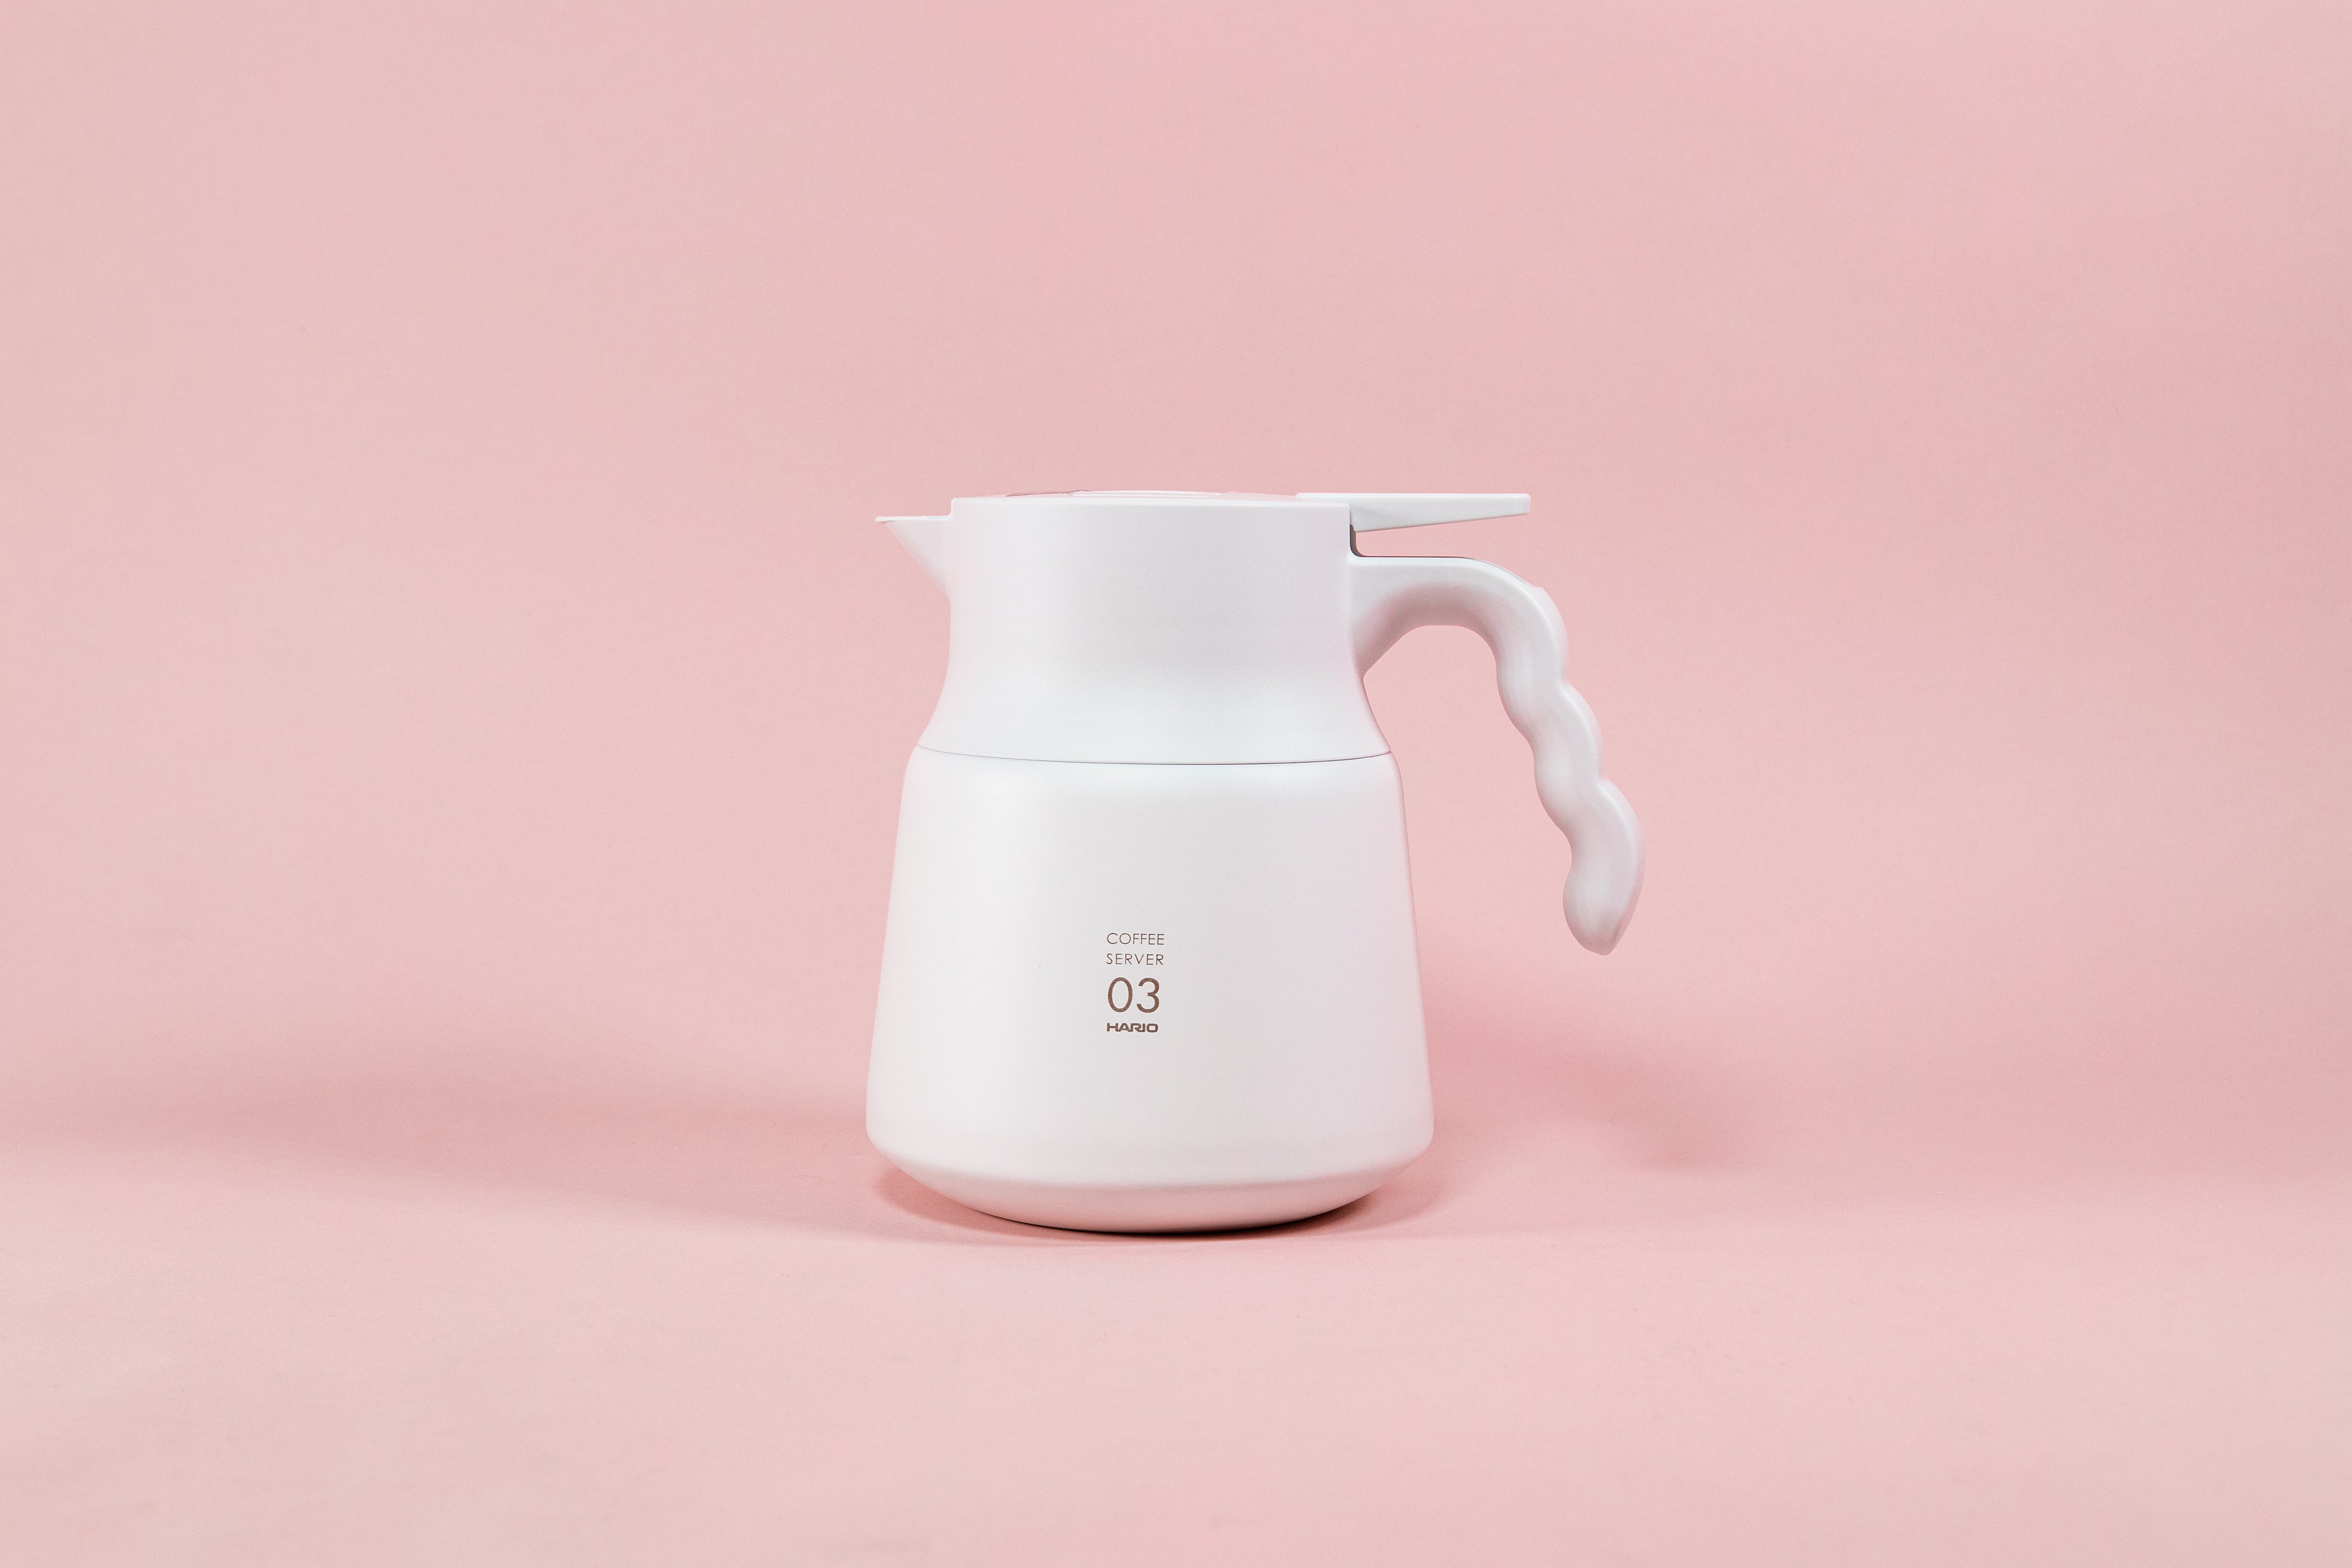 Matte white coffee server with wavy white plastic handle on a pink background.